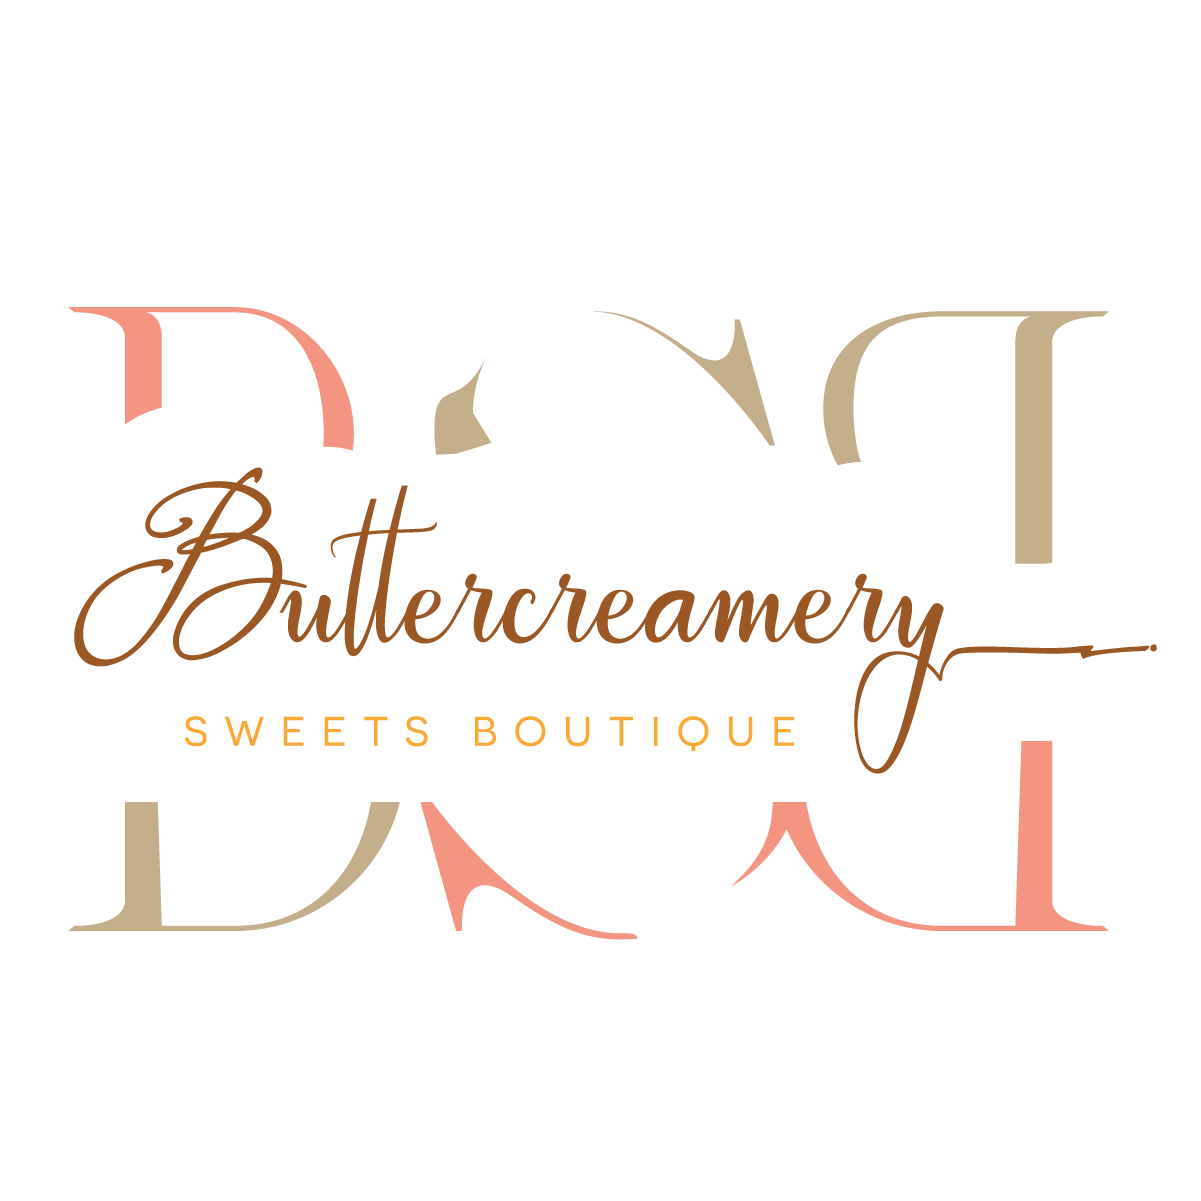 The Buttercreamery Sweets Boutique